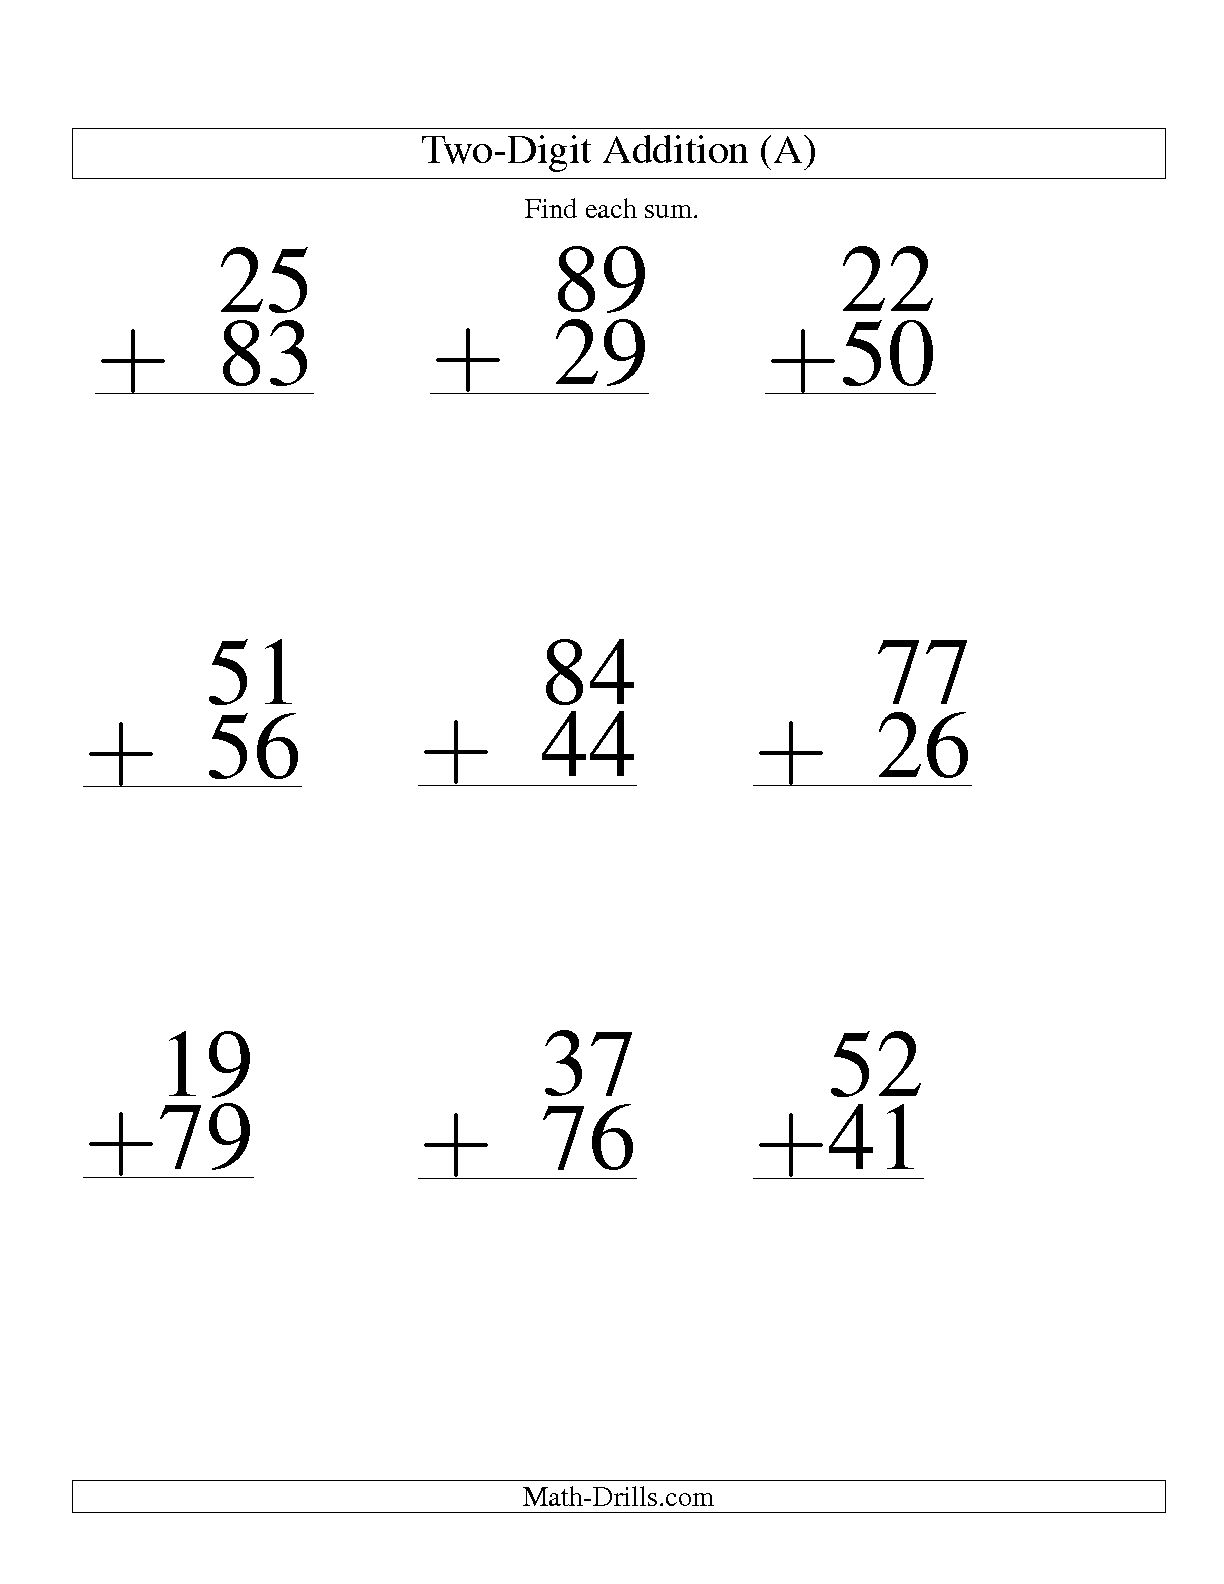 2-Digit Addition with Regrouping Image